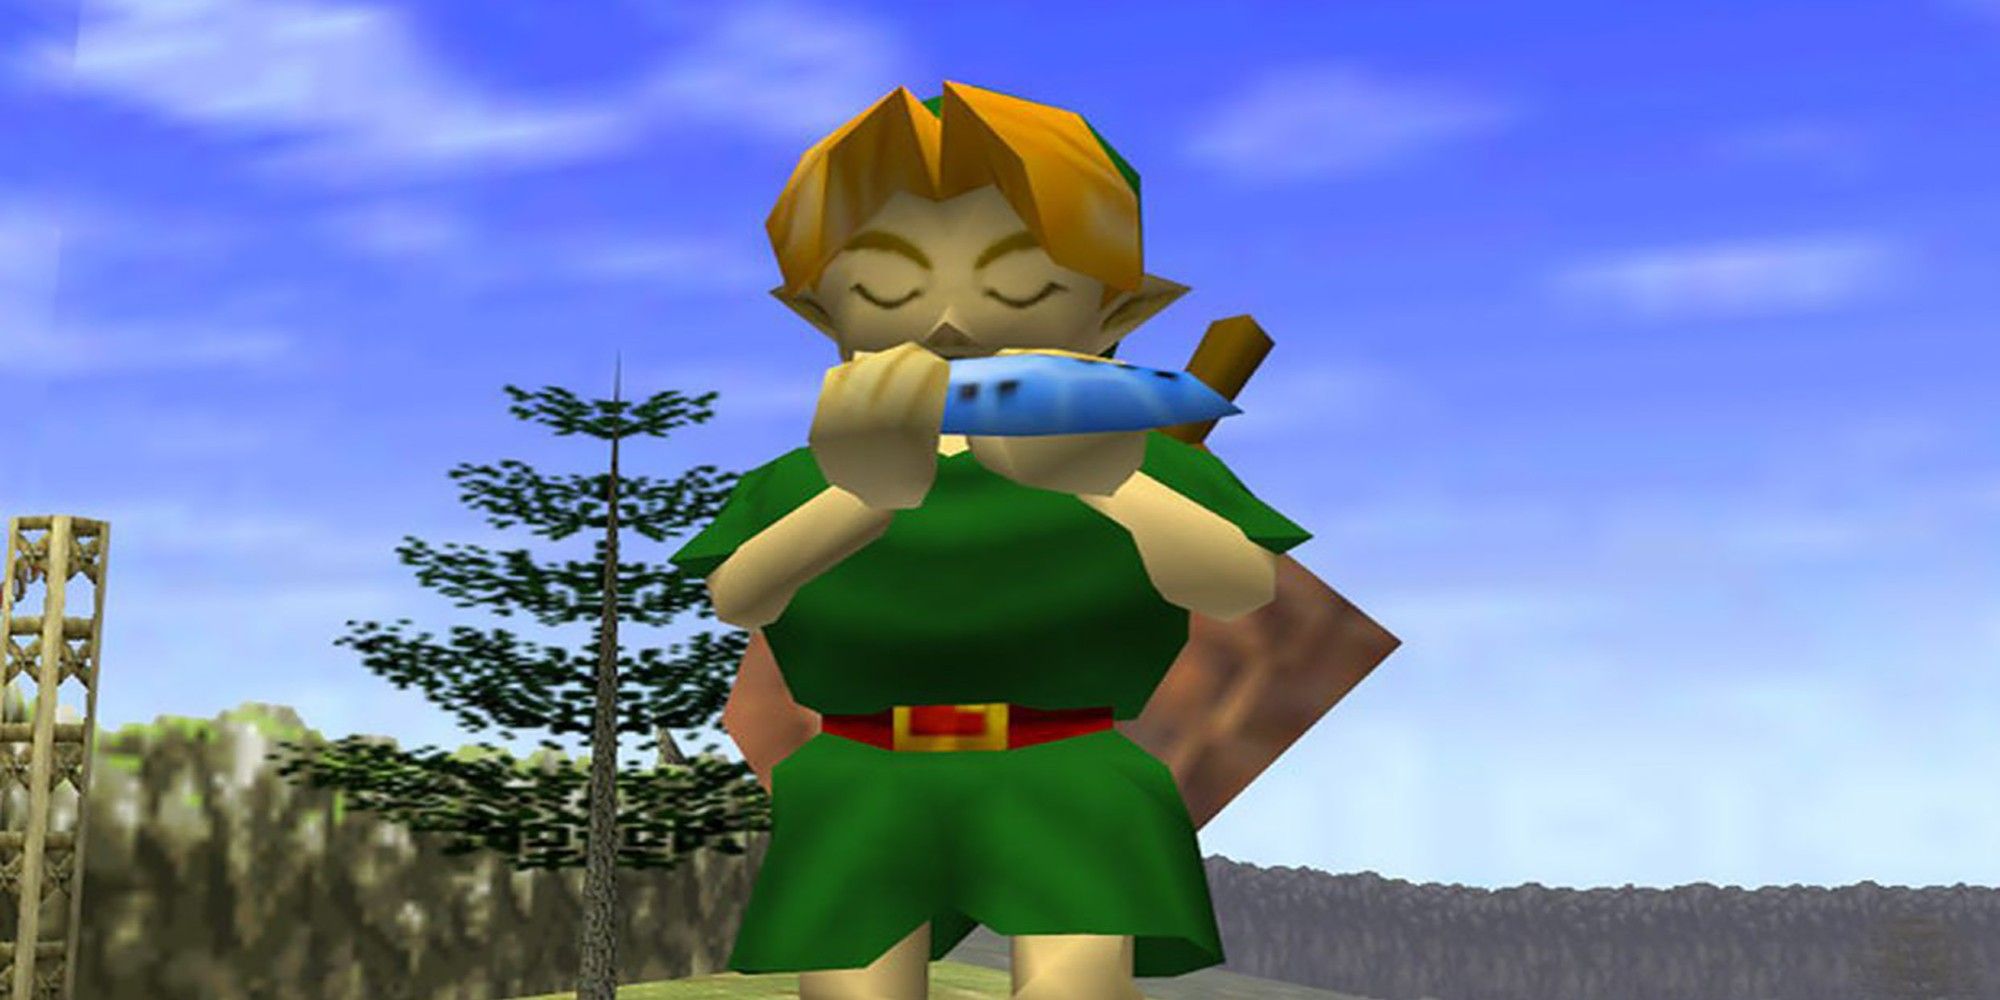 The Legend of Zelda: Ocarina of Times Remastered, Video Game Fanon Wiki